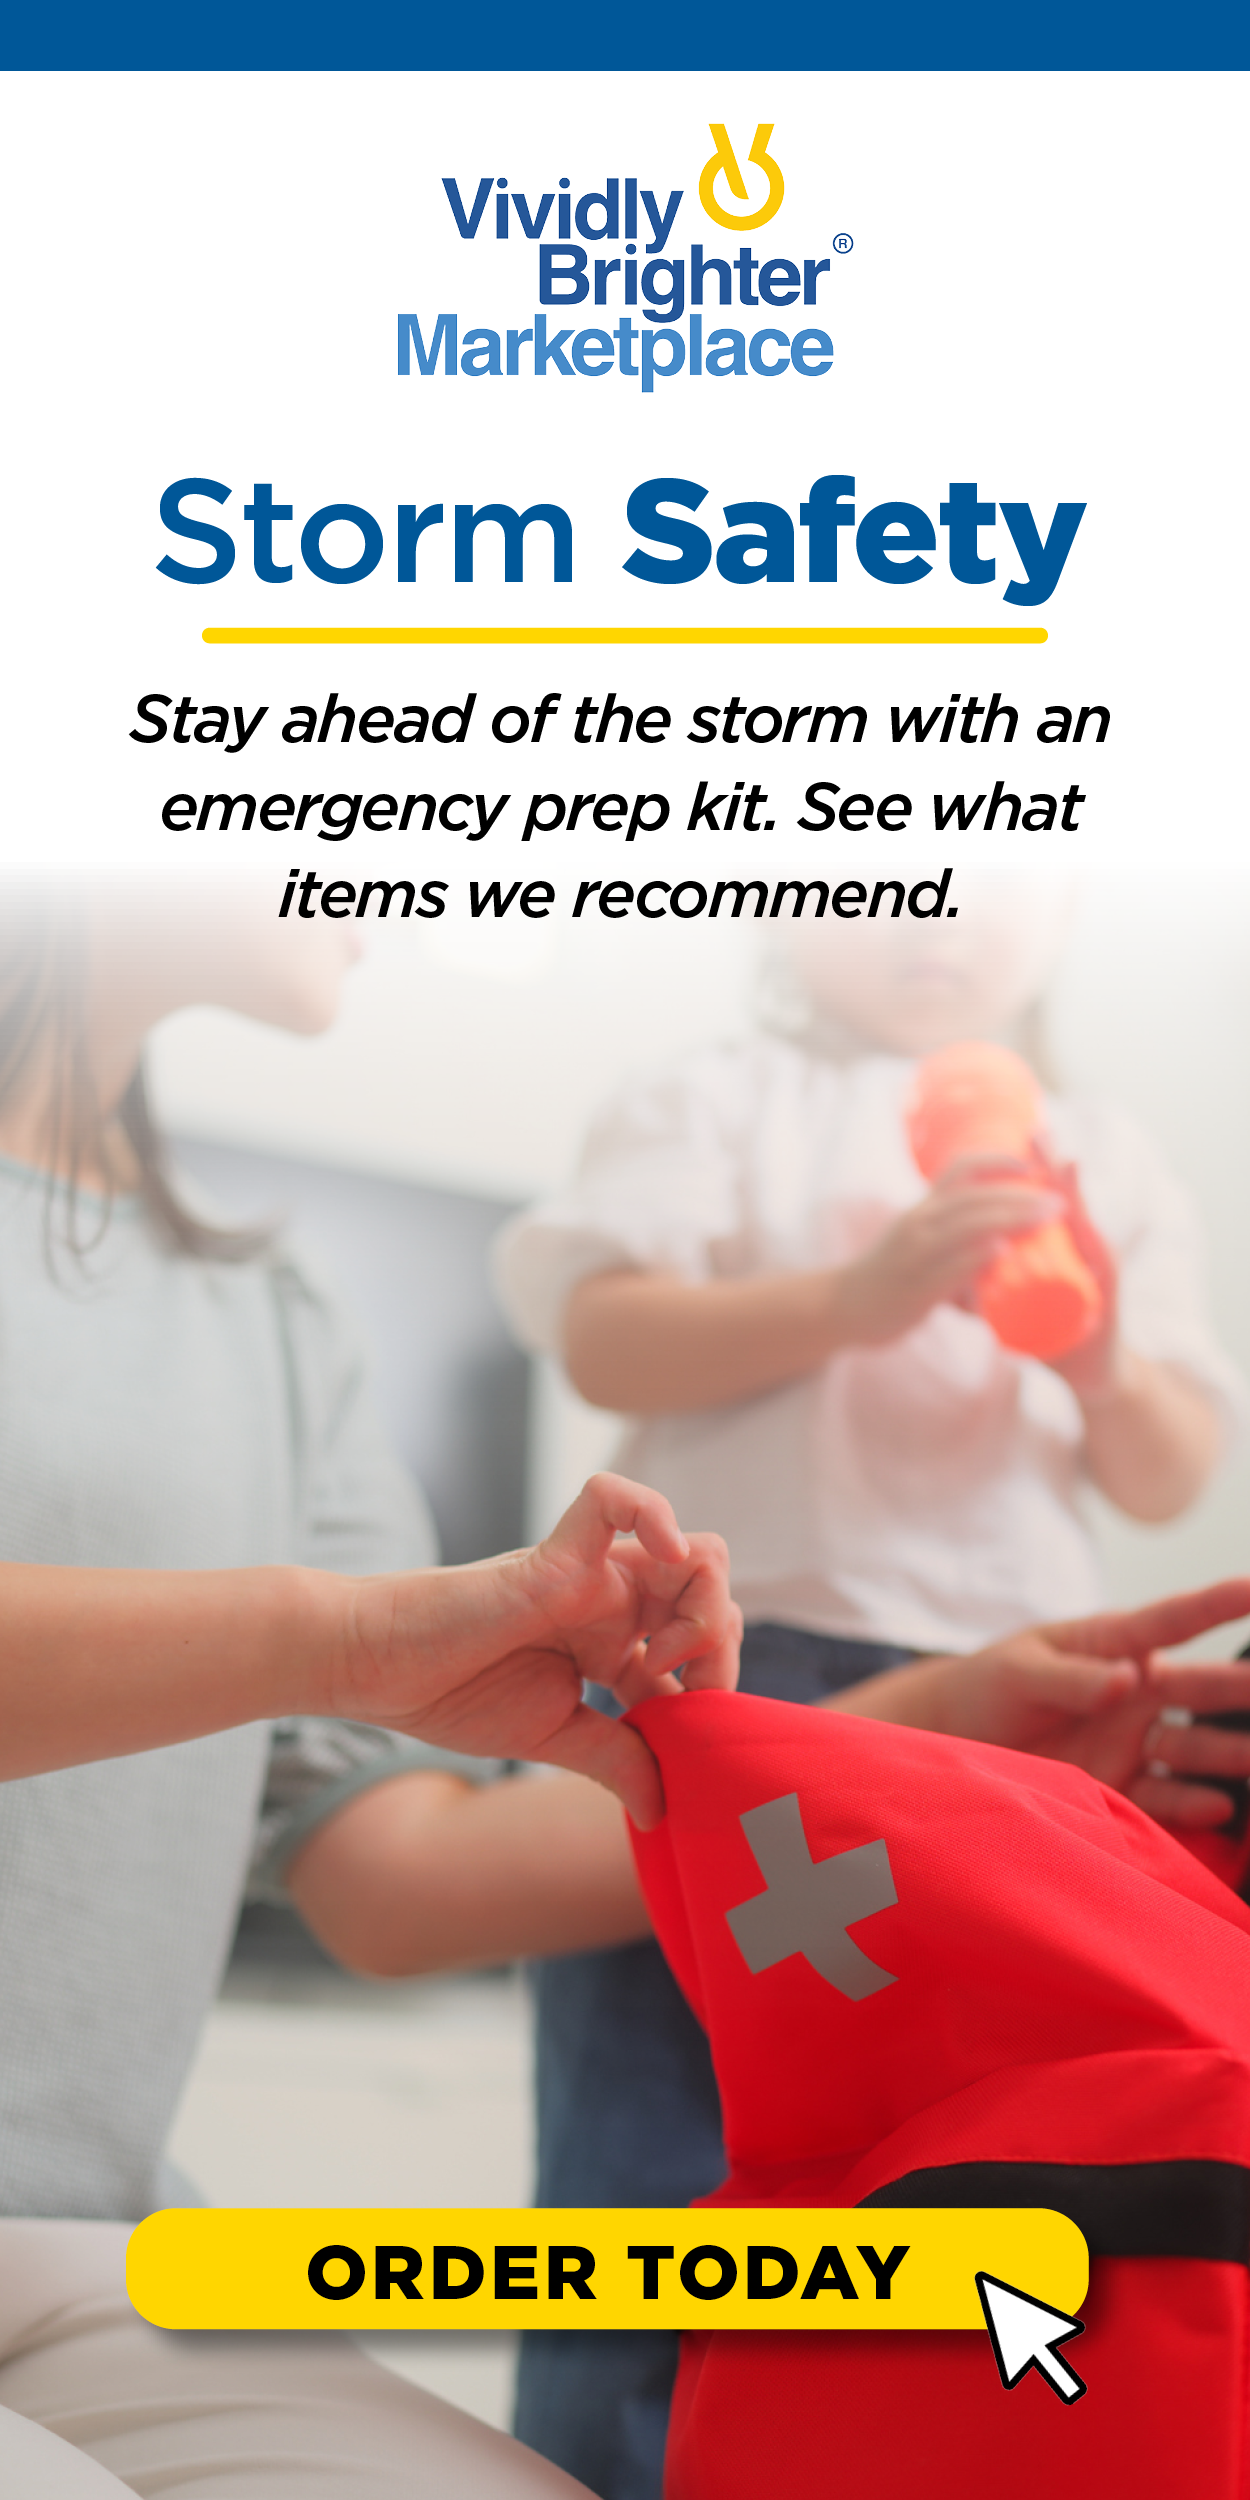 Storm Safety Ad 